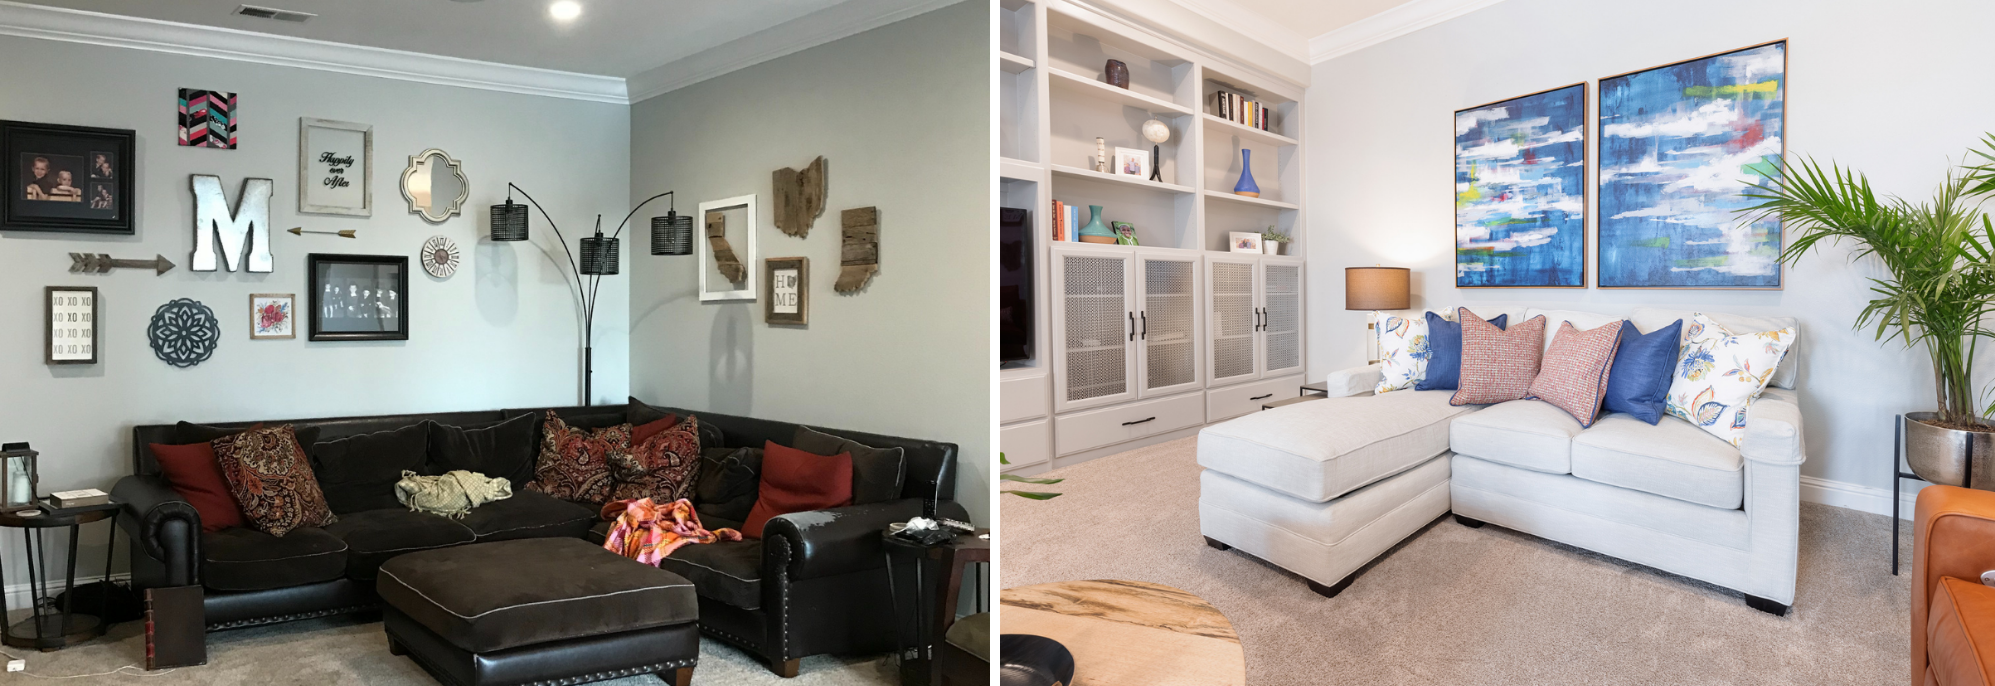 before and after of living room from dark to light airy and fun